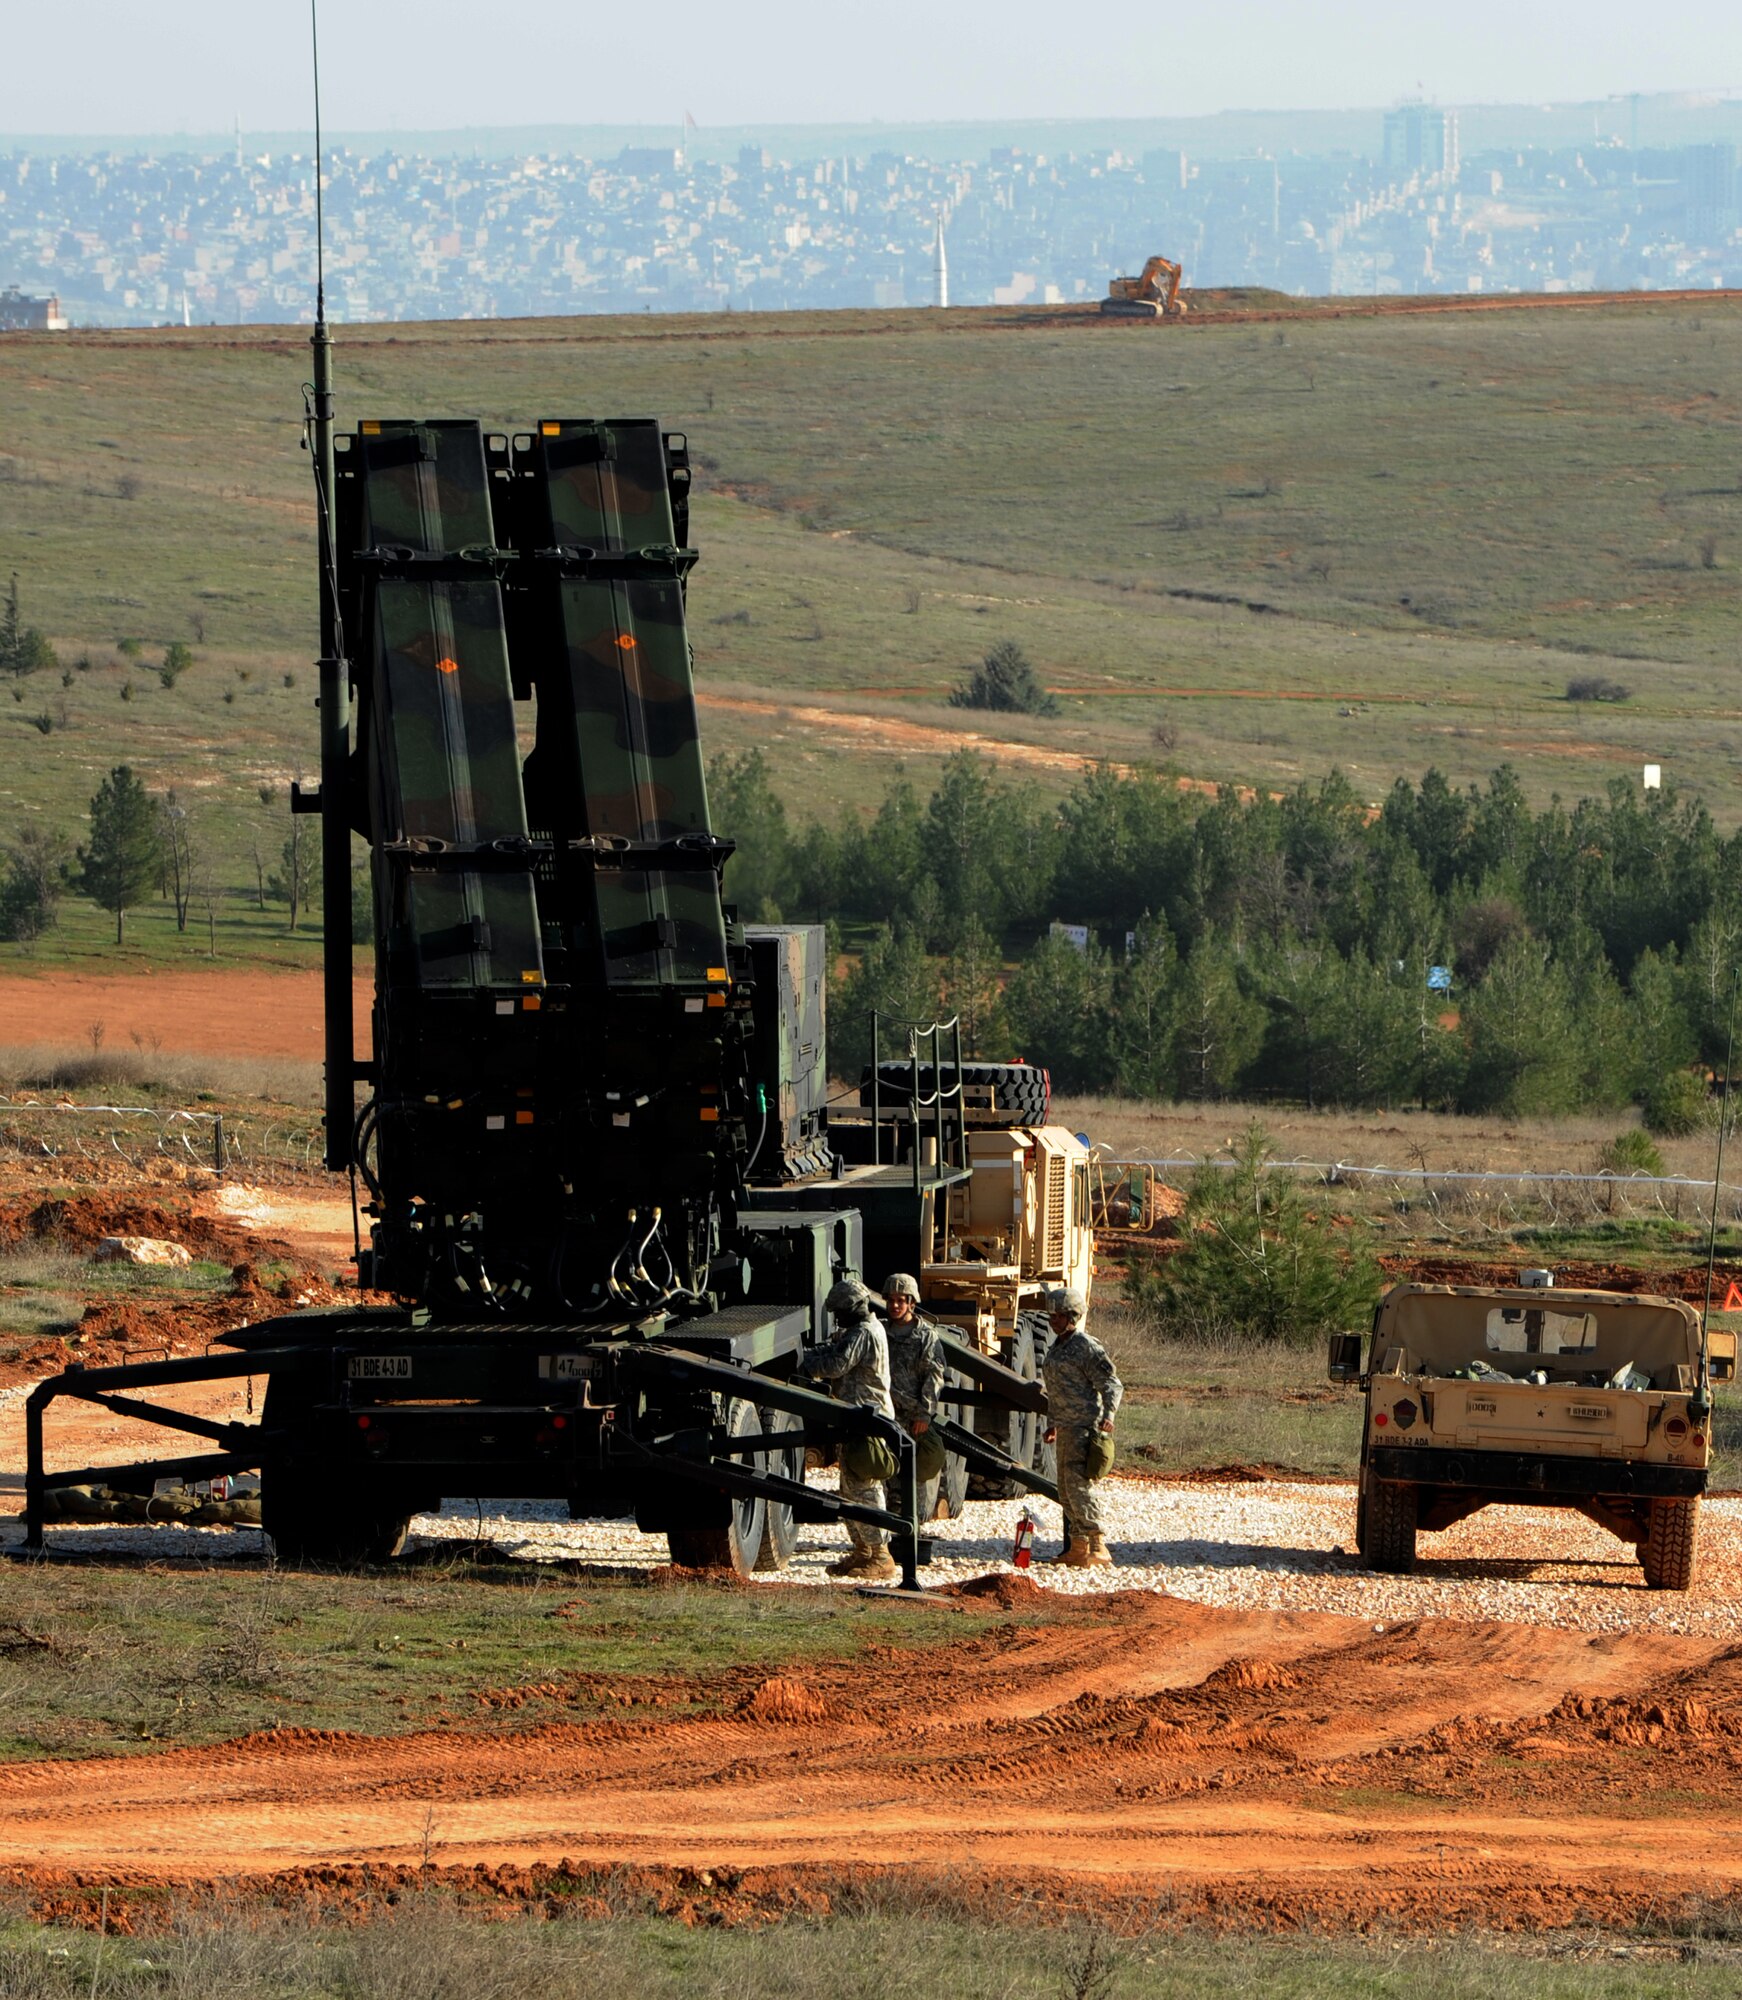 U.S. Army soldiers from the 3rd Battalion, 2nd Air Defense Artillery check the settings of a Patriot launching station Feb. 28, 2013, near Gaziantep, Turkey. The 3-2 ADA from Fort Sill, Okla. is deployed to Turkey as part of NATO’s effort for a cooperative solution to promote regional stability and augment Turkey’s air defense capabilities. (U.S. Air Force photo by Senior Airman Daniel Phelps/Released)